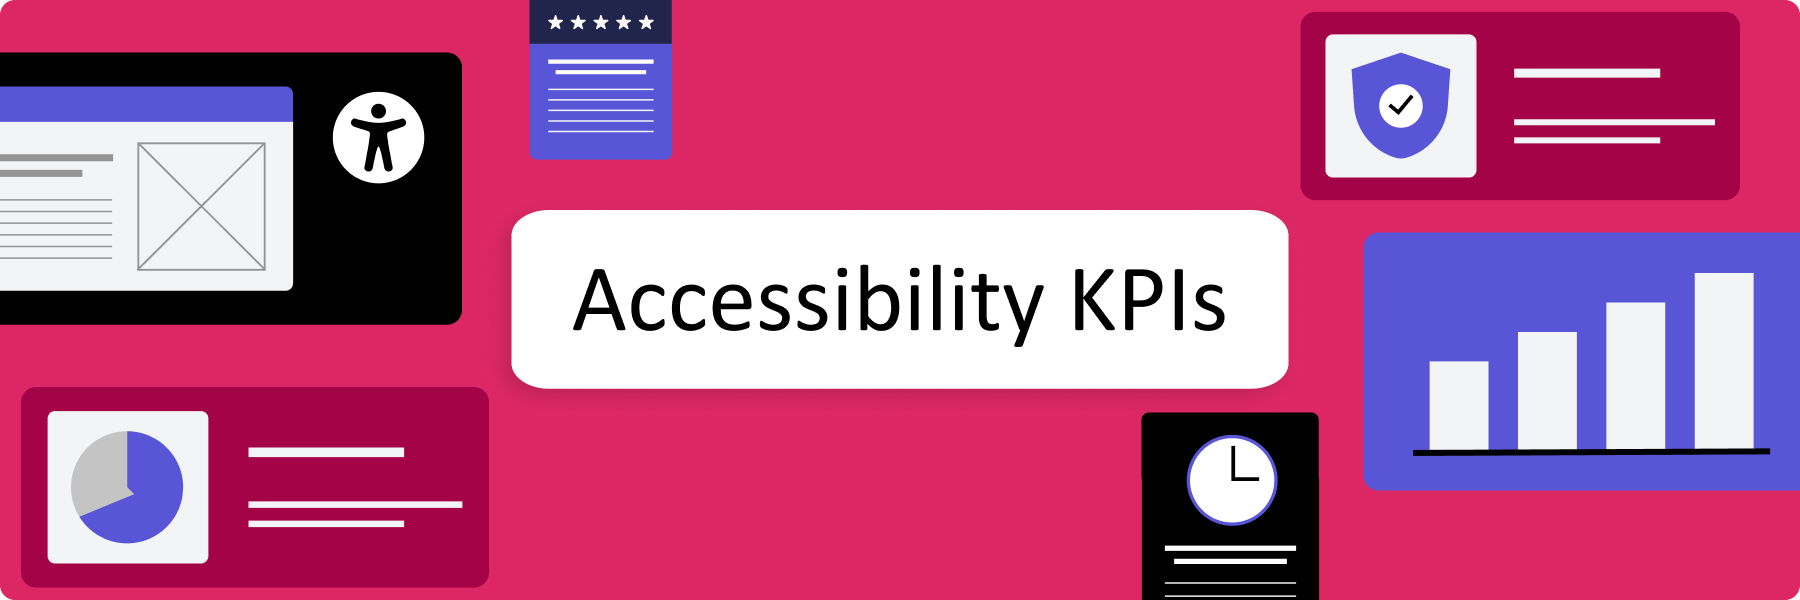 Decorative banner image illustration that says 'Accessibility KPIs' with illustrations of quantitative ways to measure progress such as 5-star reviews, upward trending graphs, pie charts and completed certifications.